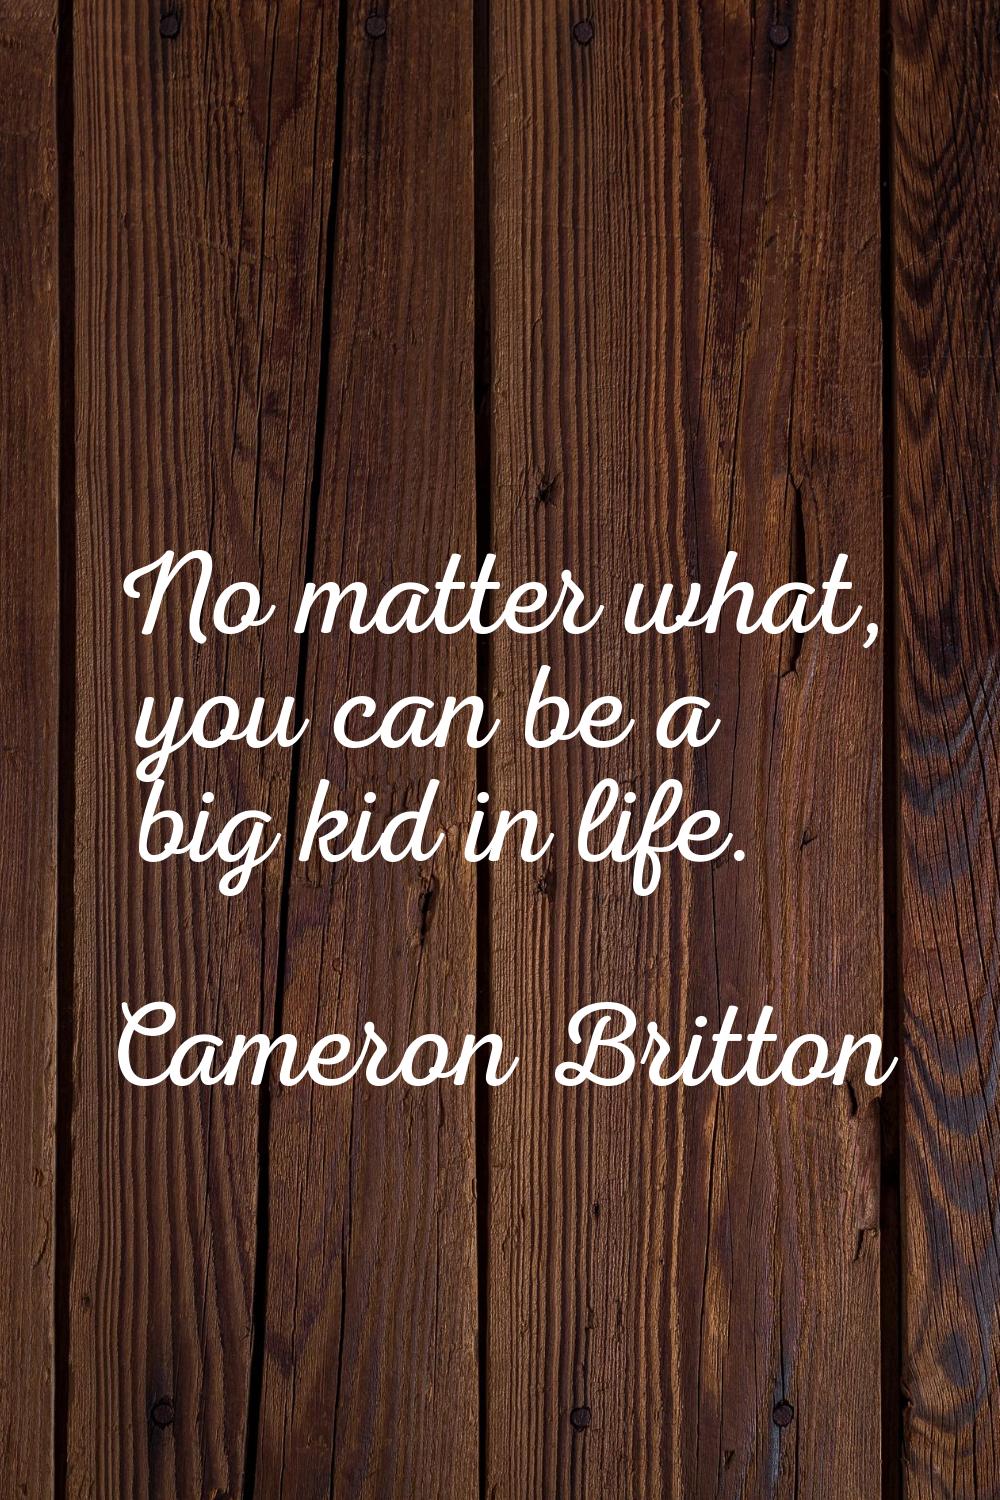 No matter what, you can be a big kid in life.